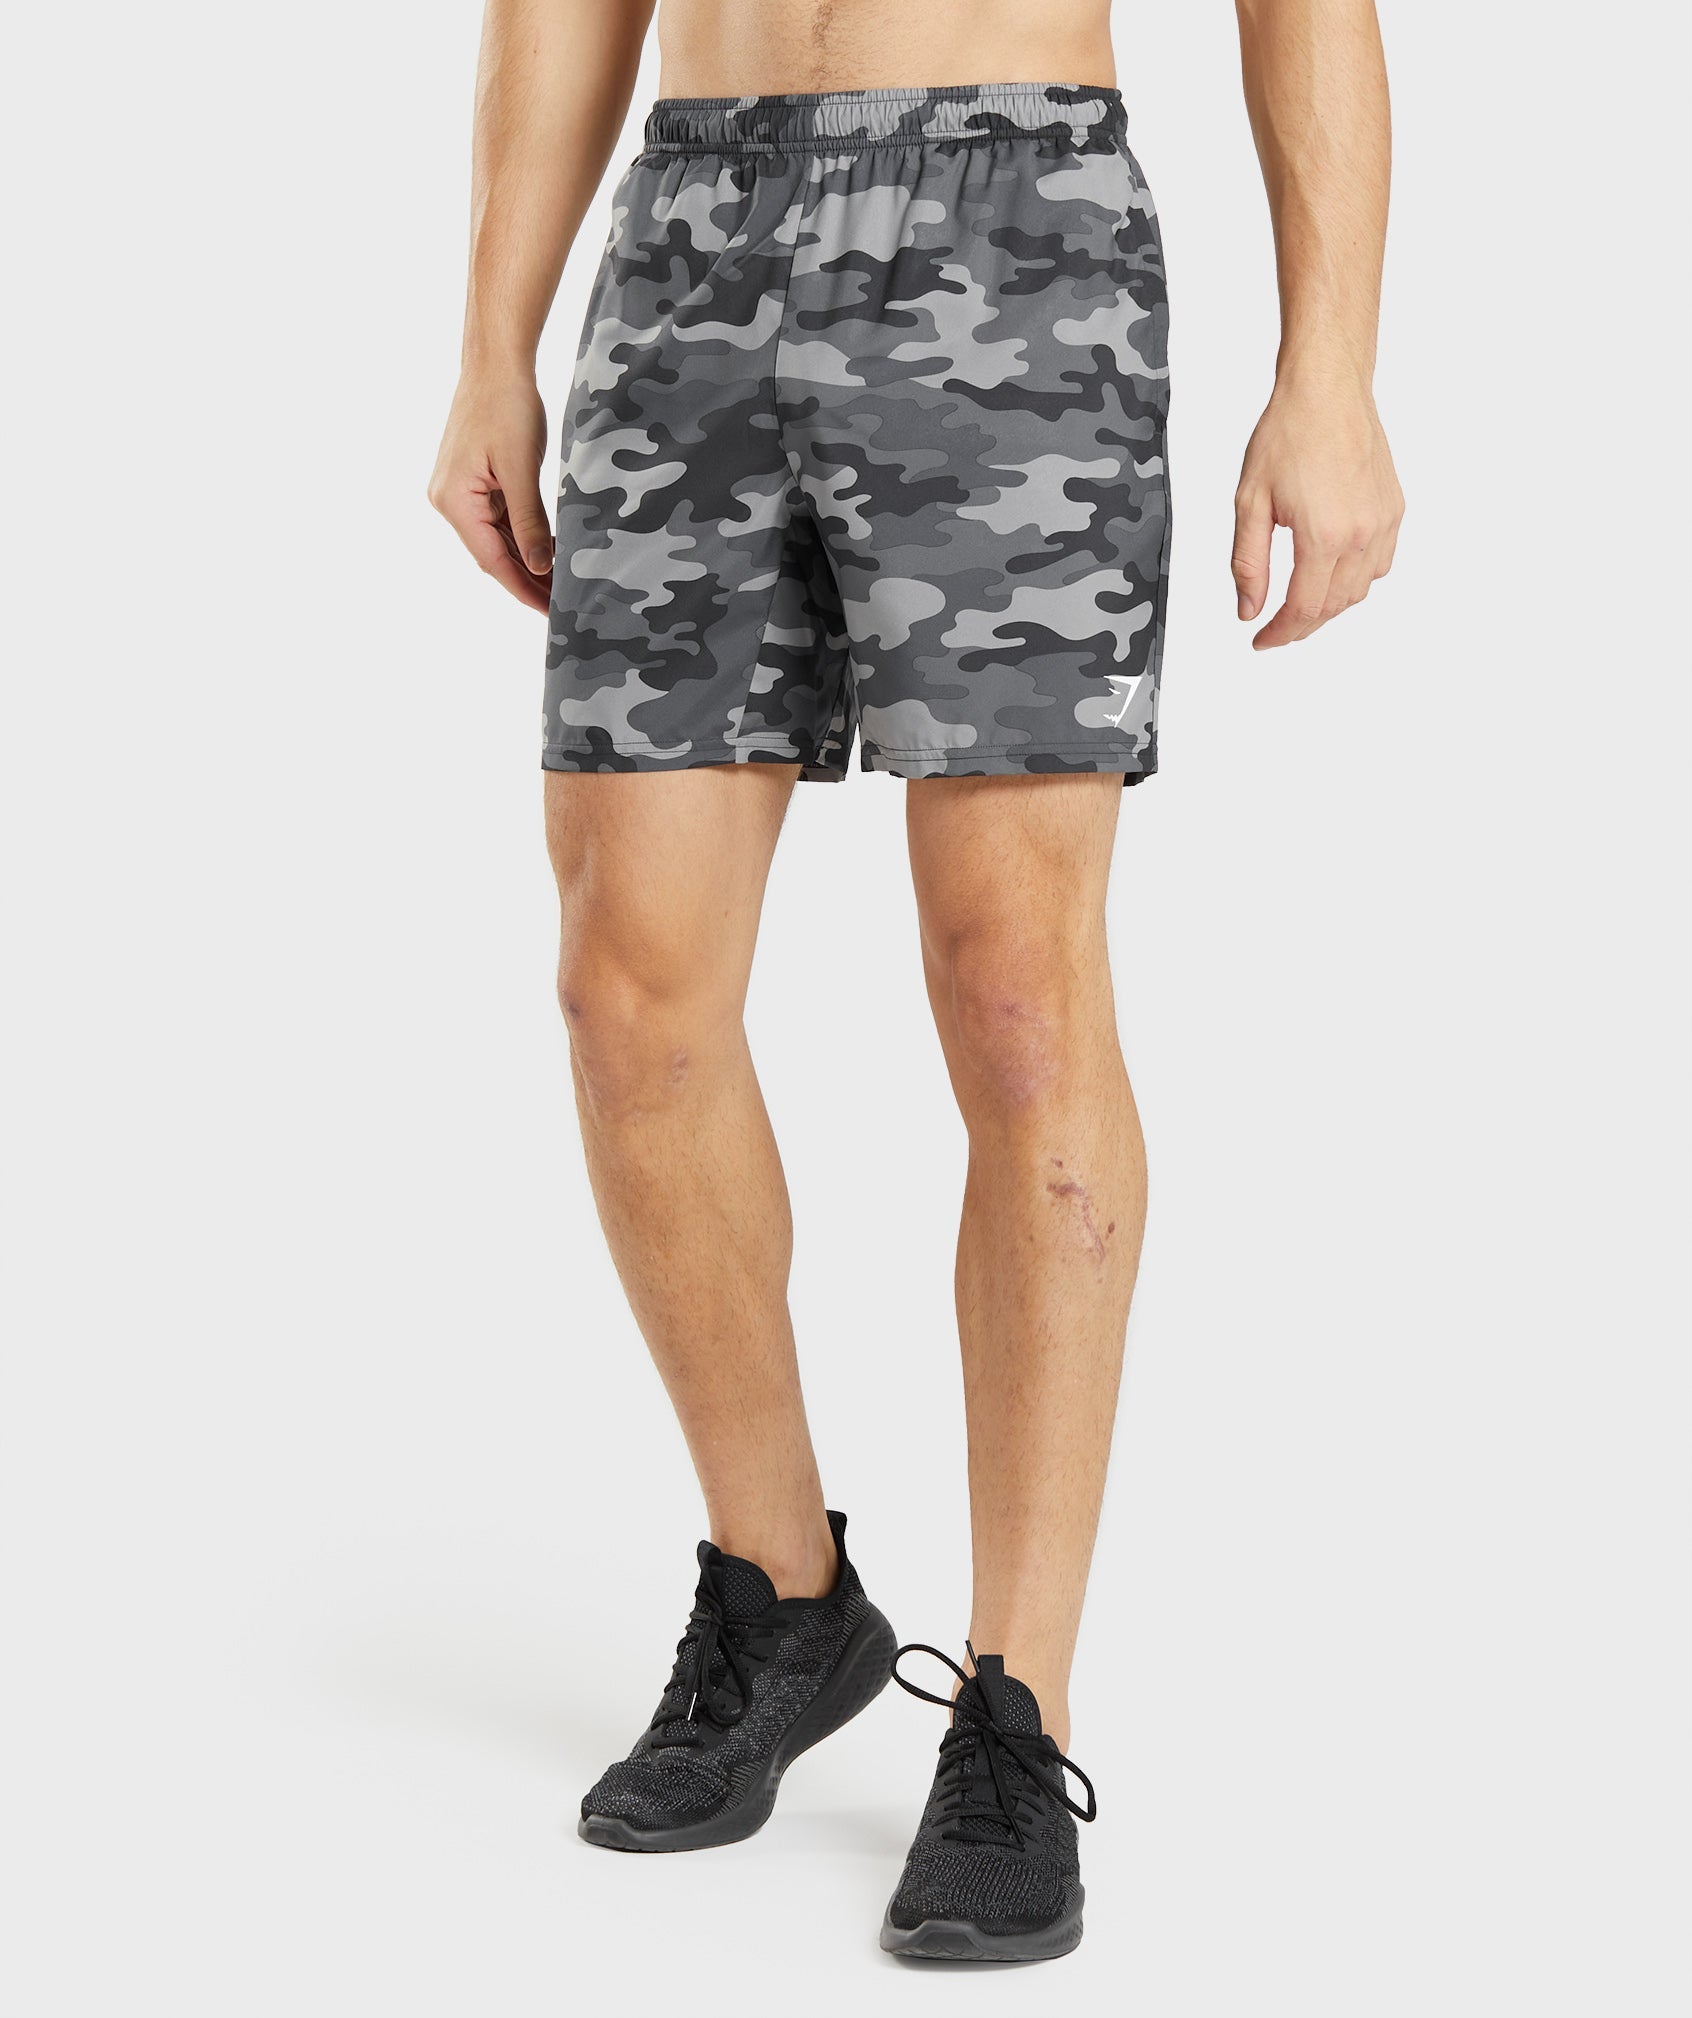 Arrival 7" Shorts in Grey Print is out of stock